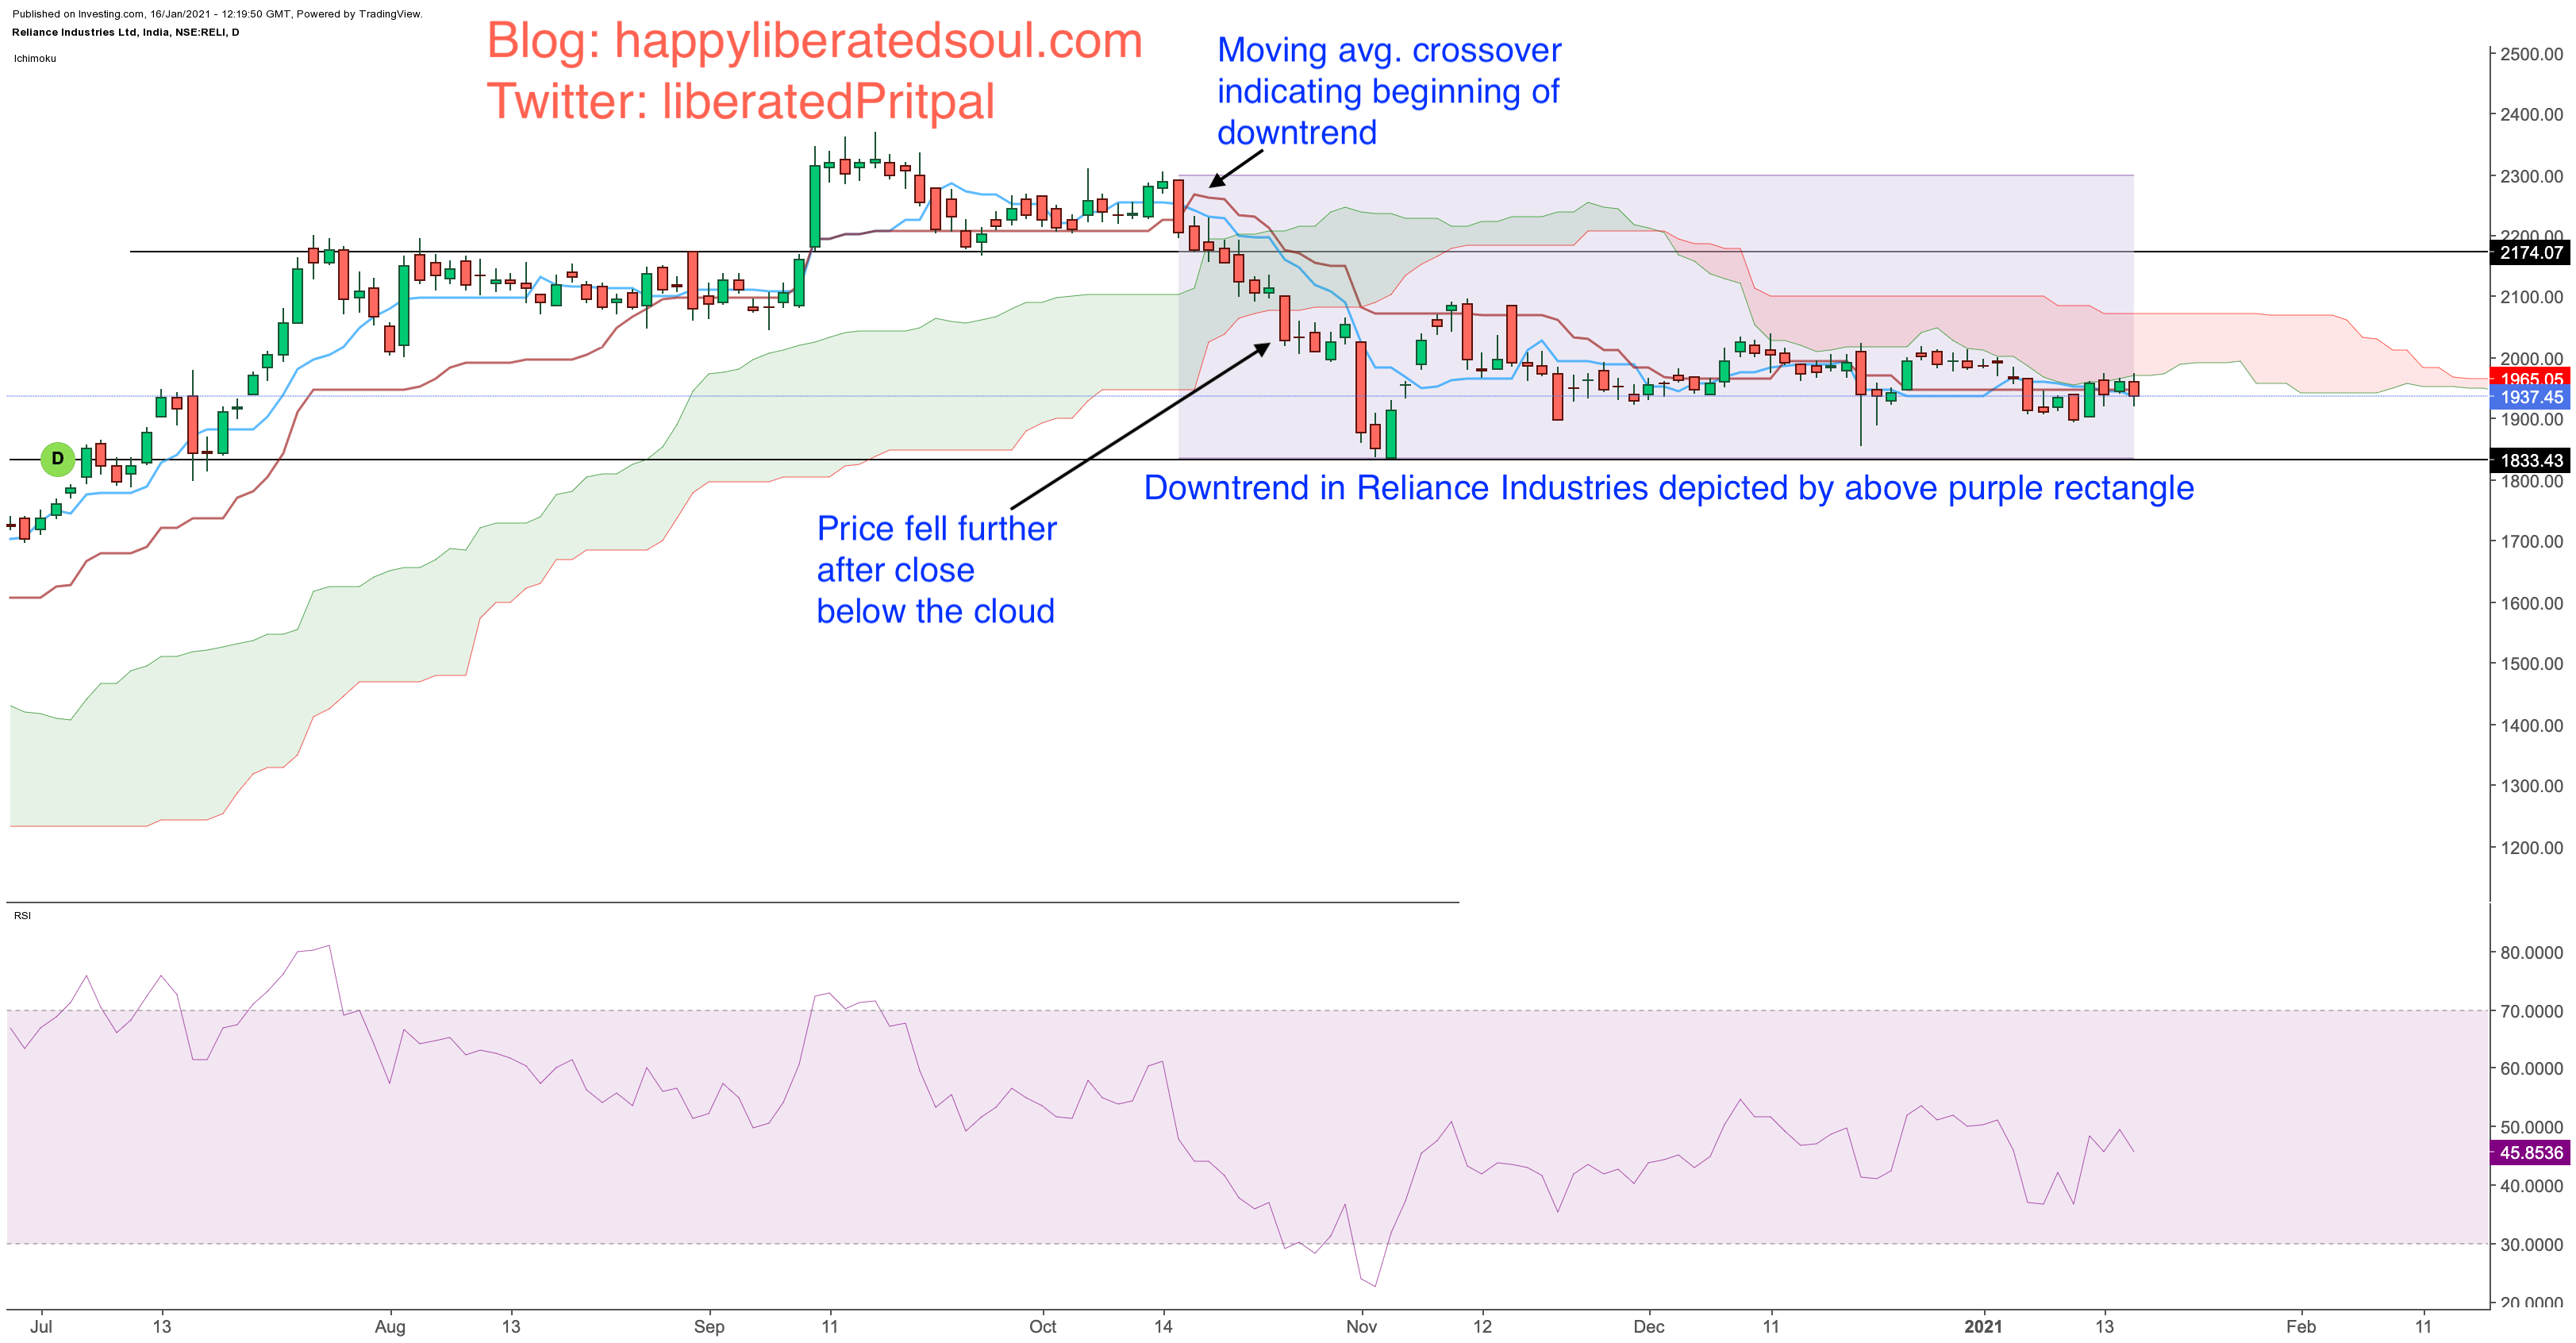 Moving averages bearish crossover with Ichimoku Clouds Trading strategy on Reliance Industries chart on daily timeframe: Happy liberated soul